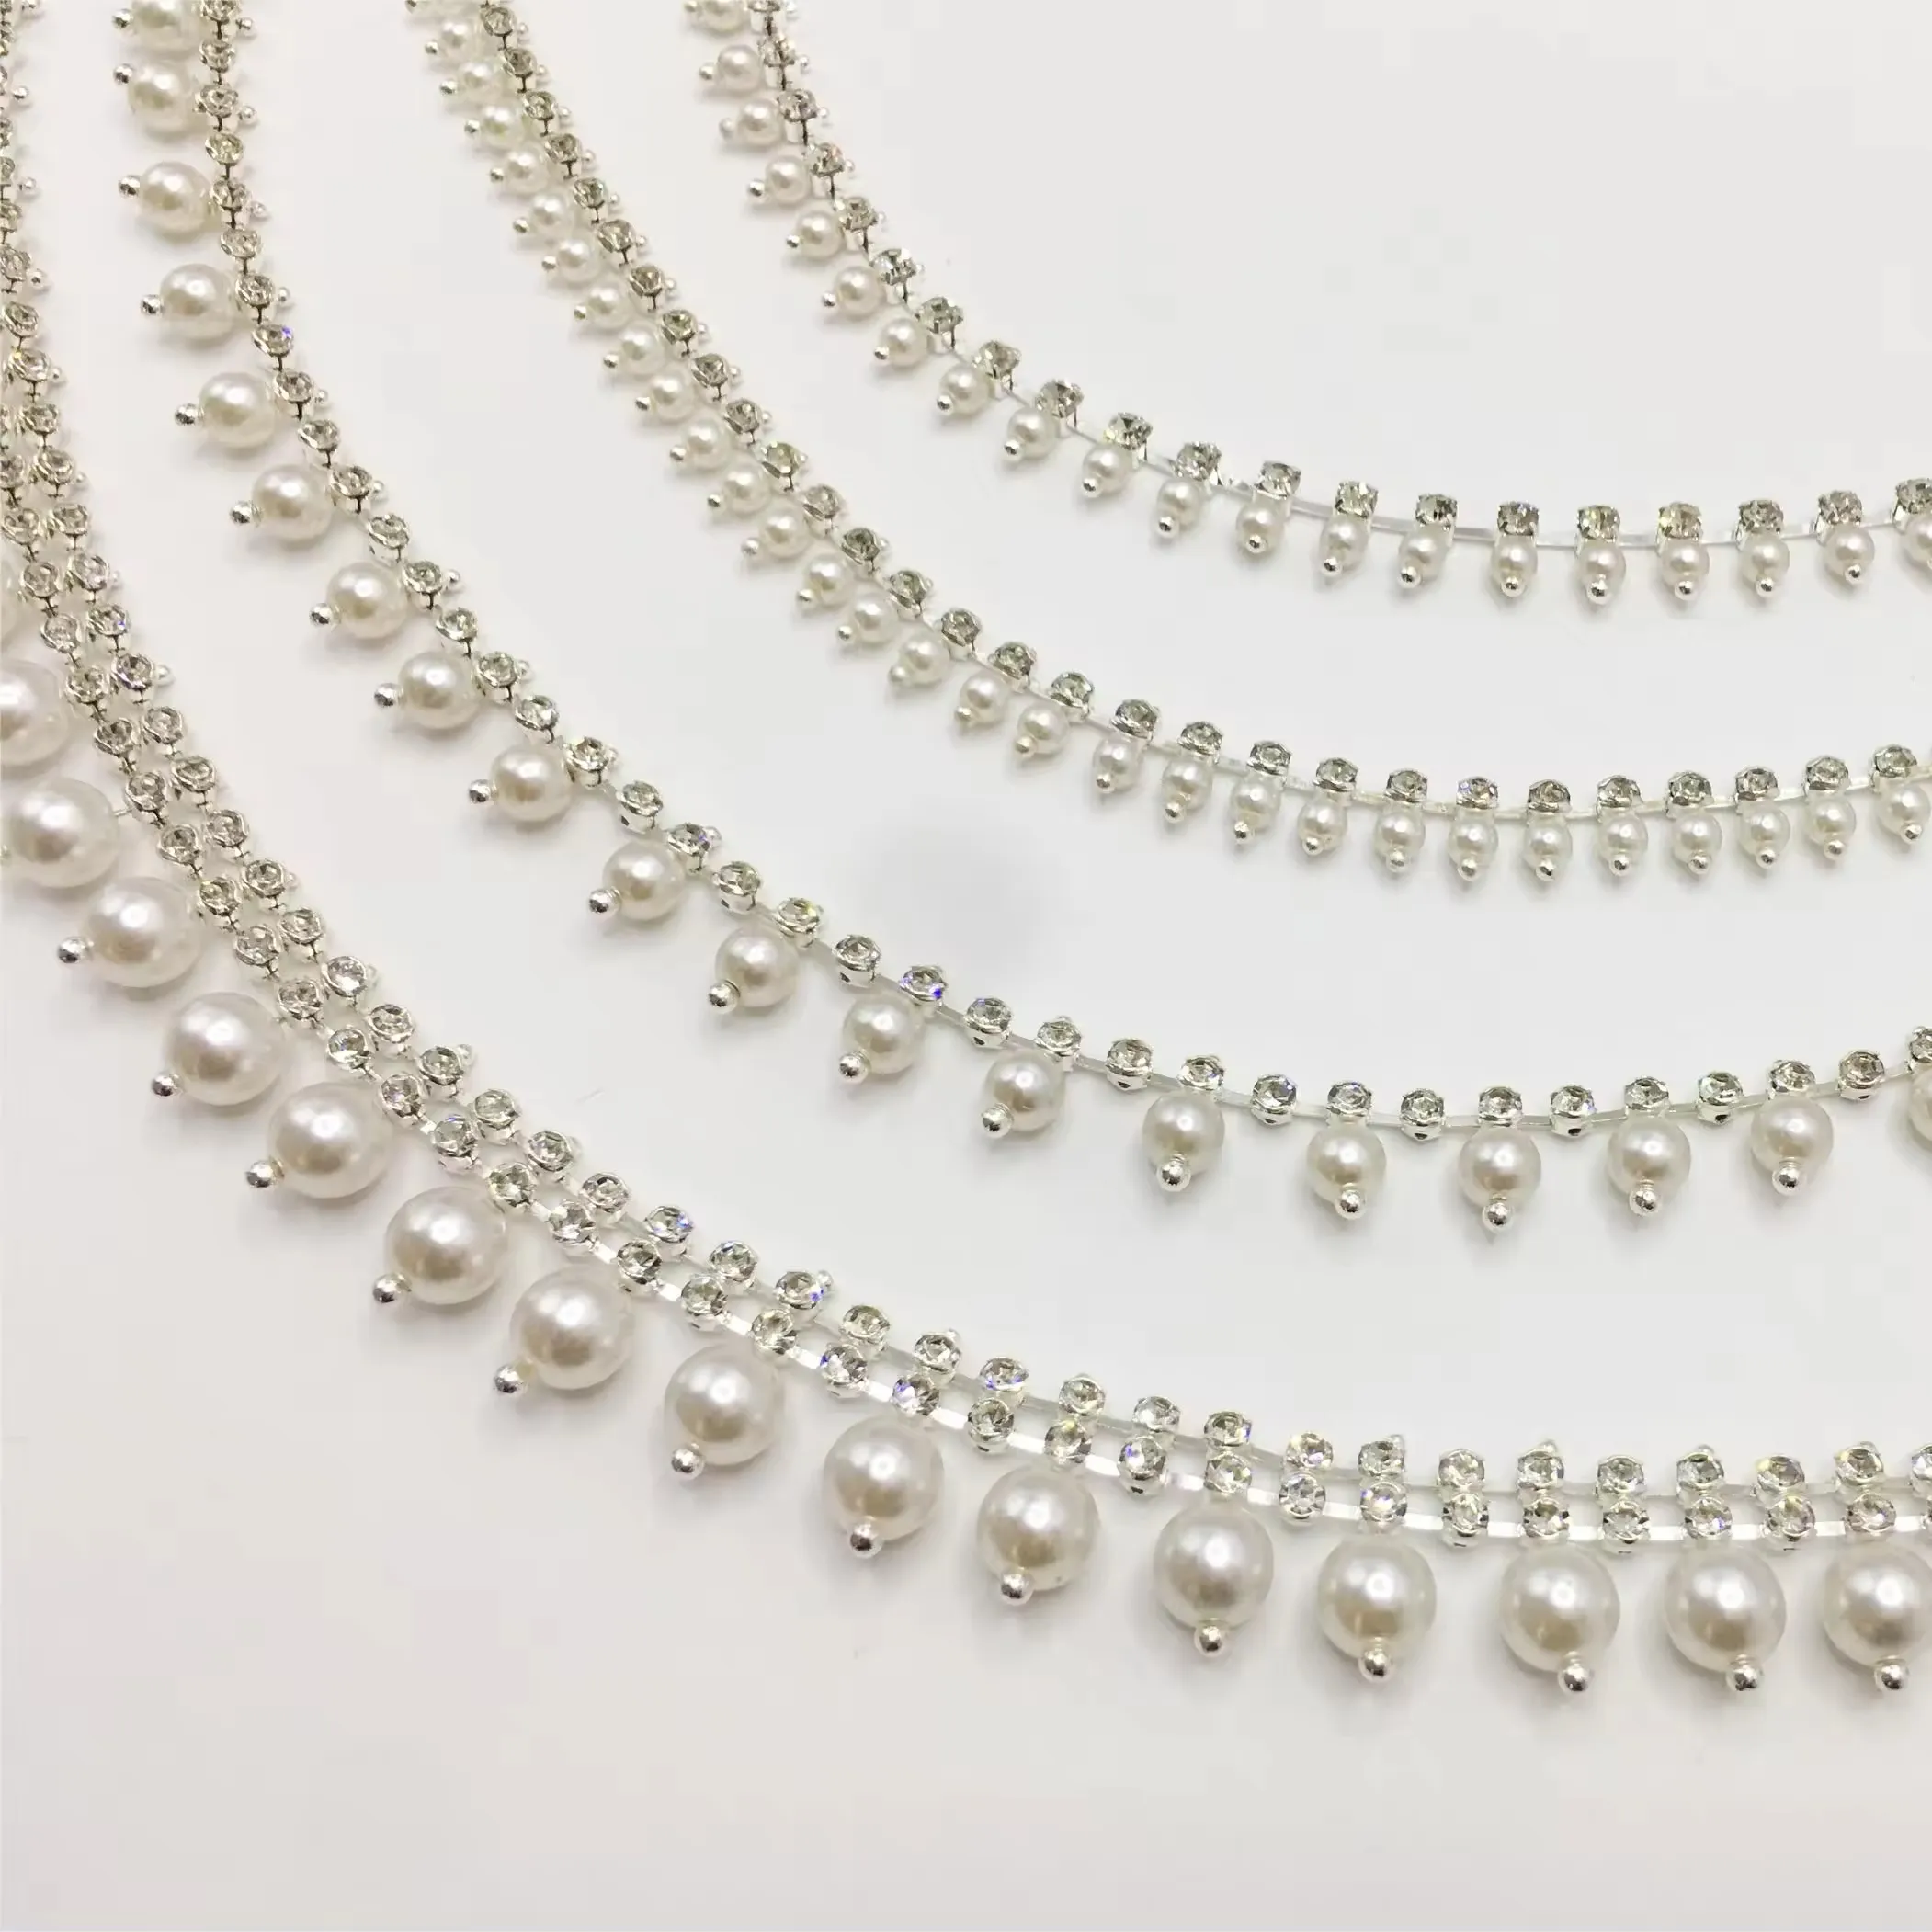 4mm/6mm/8mm Water Diamond Flower Pearl Chain Flatback Style Wedding Waist Chain Decoration Shoes Nail Art Clothing Accessories